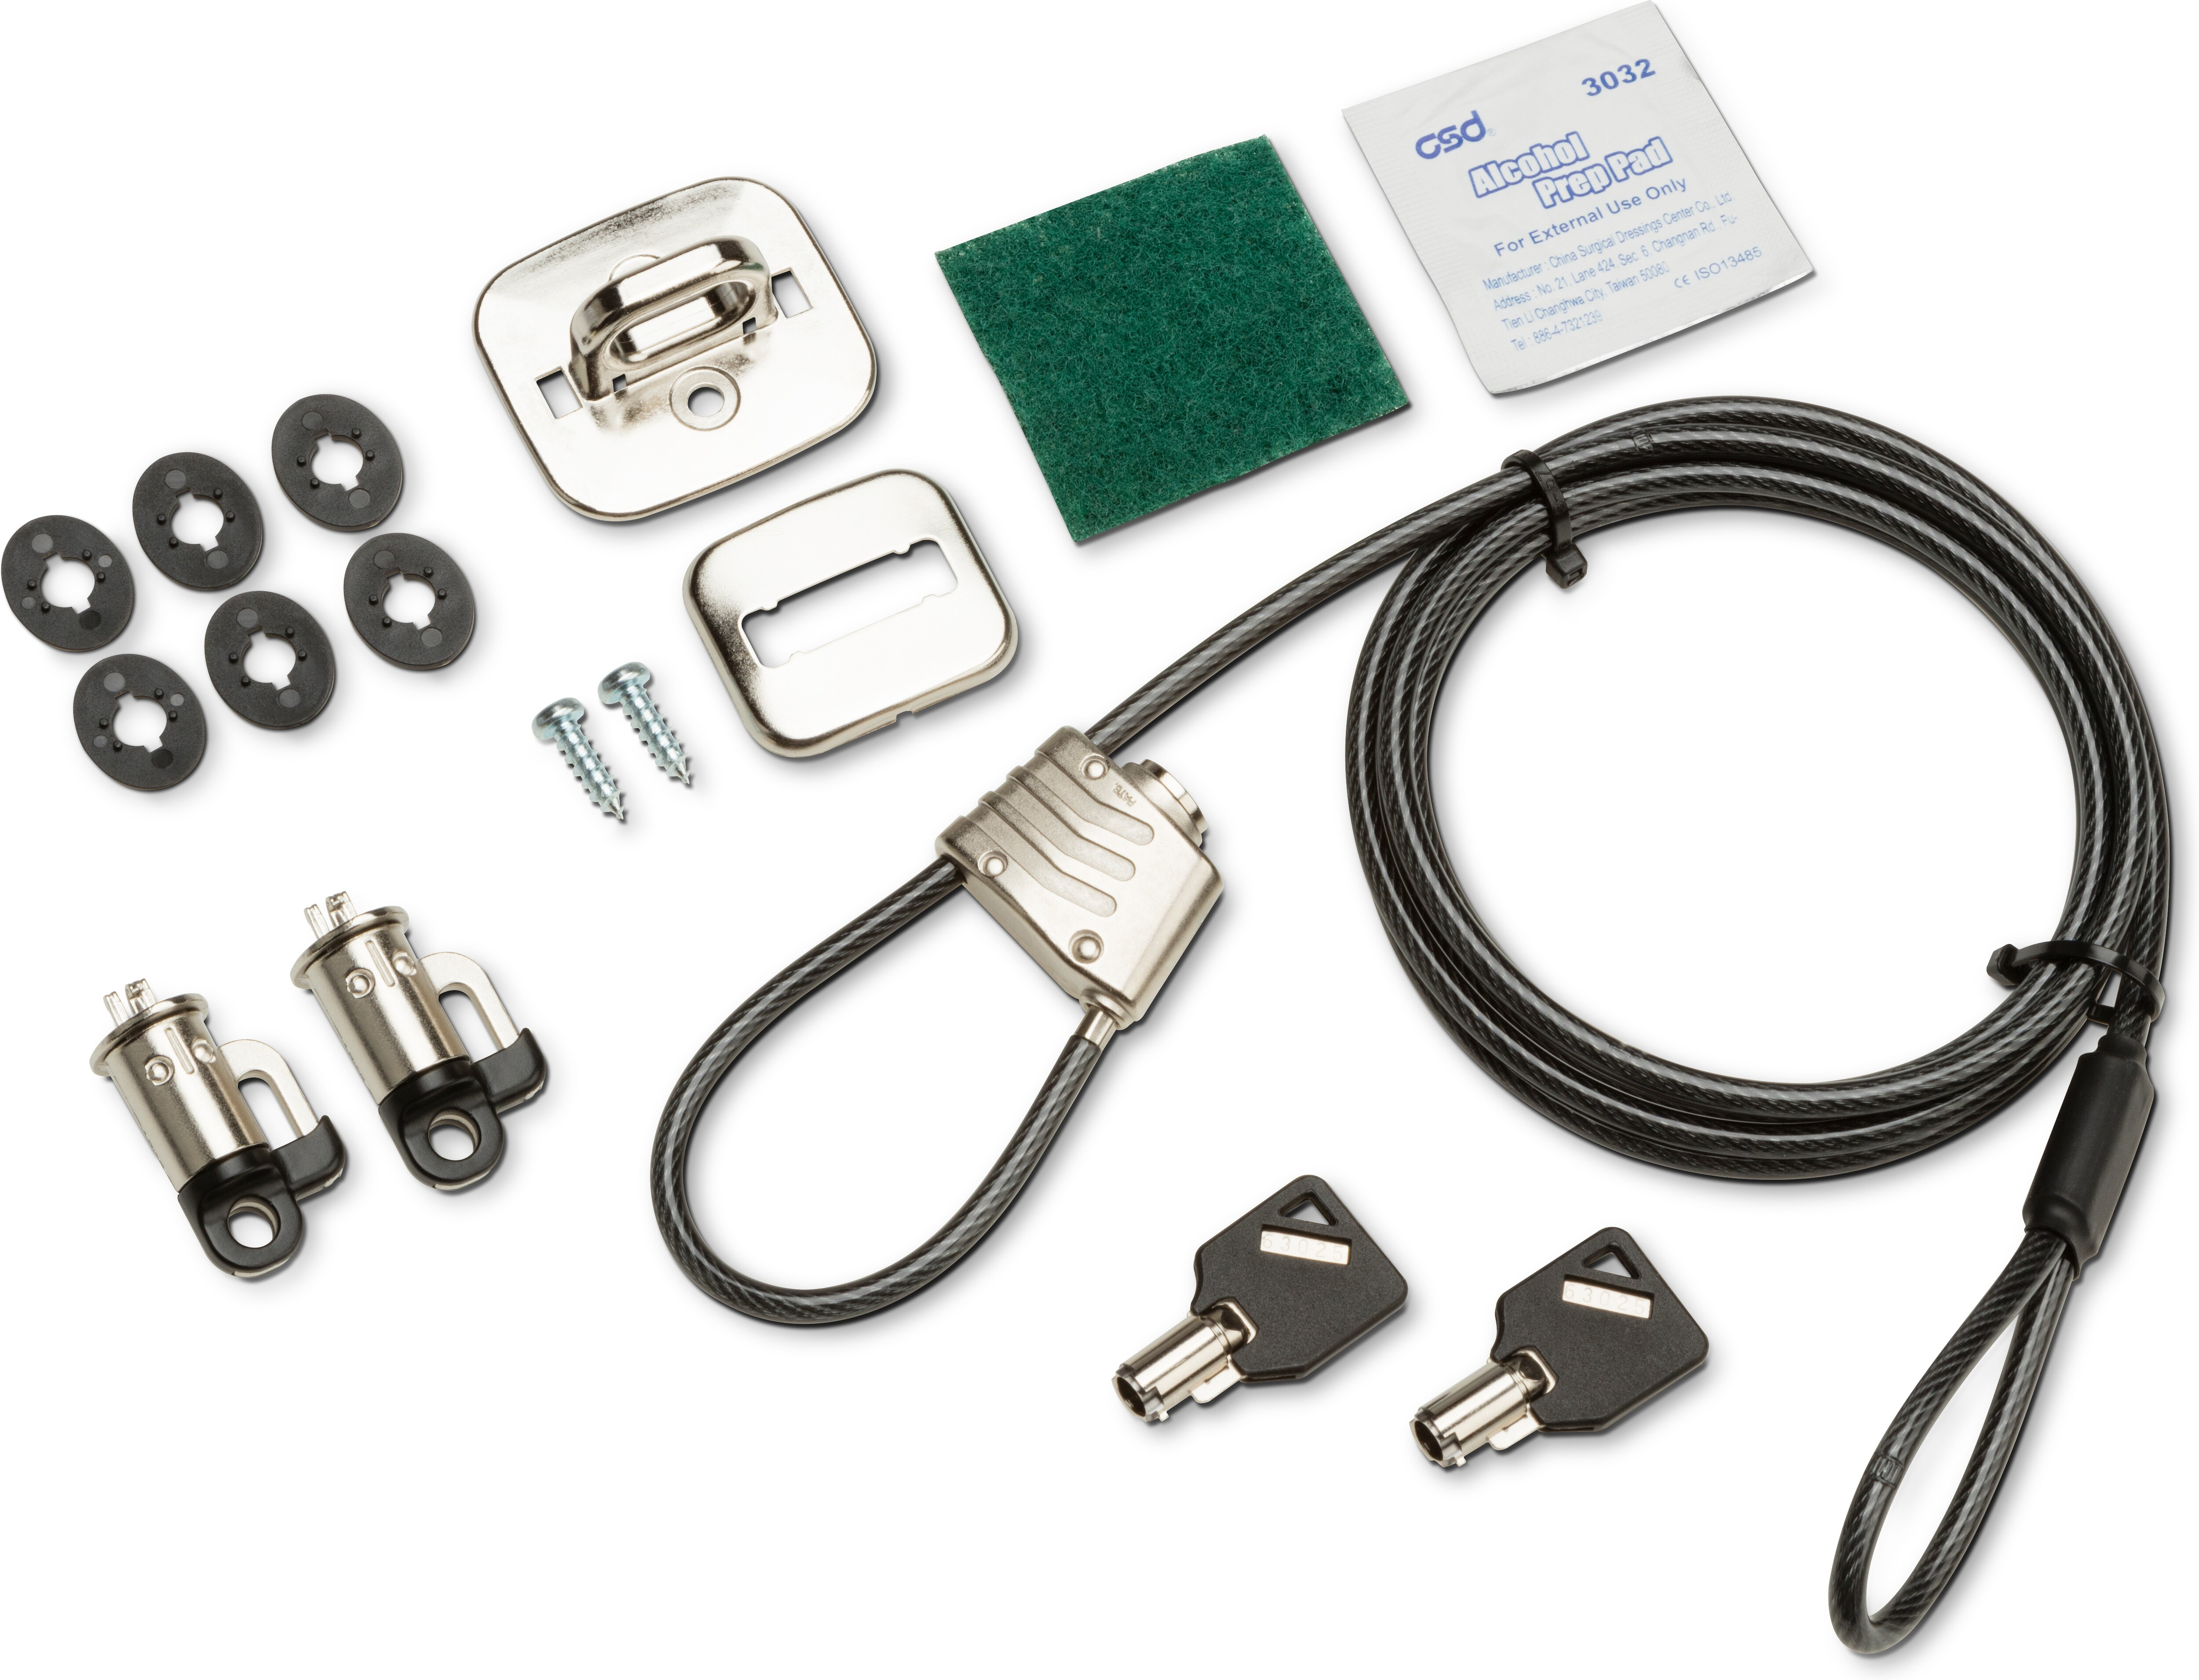 HP Business PC Security Lock v3 Kit - Sicherheitskit - für HP 280 G3, 280 G4, 285 G3, 290 G1, 290 G2, 290 G3; Desktop Pro A 300 G3, Pro A G2; EliteDesk 705 G4 (micro tower, SFF)